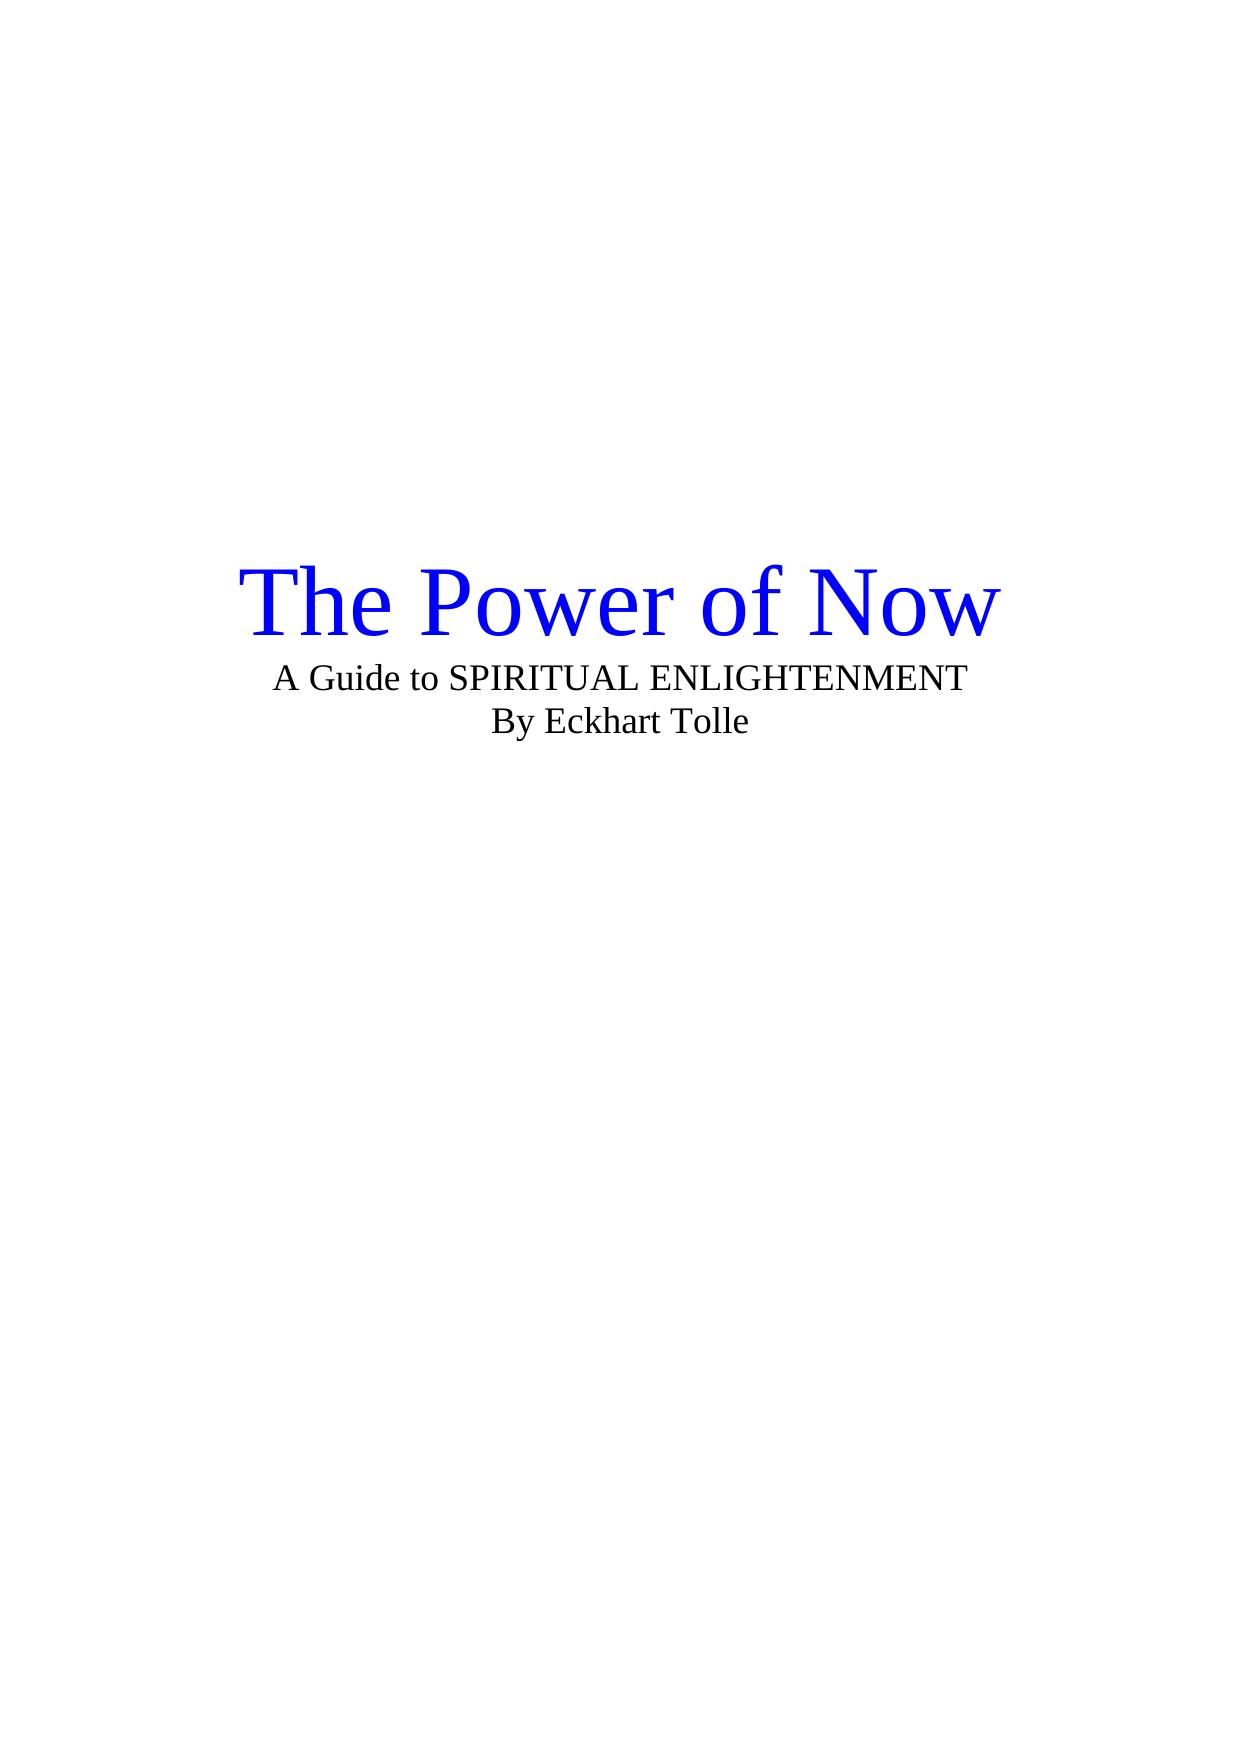 The Power Of Now by Eckhart Tolle